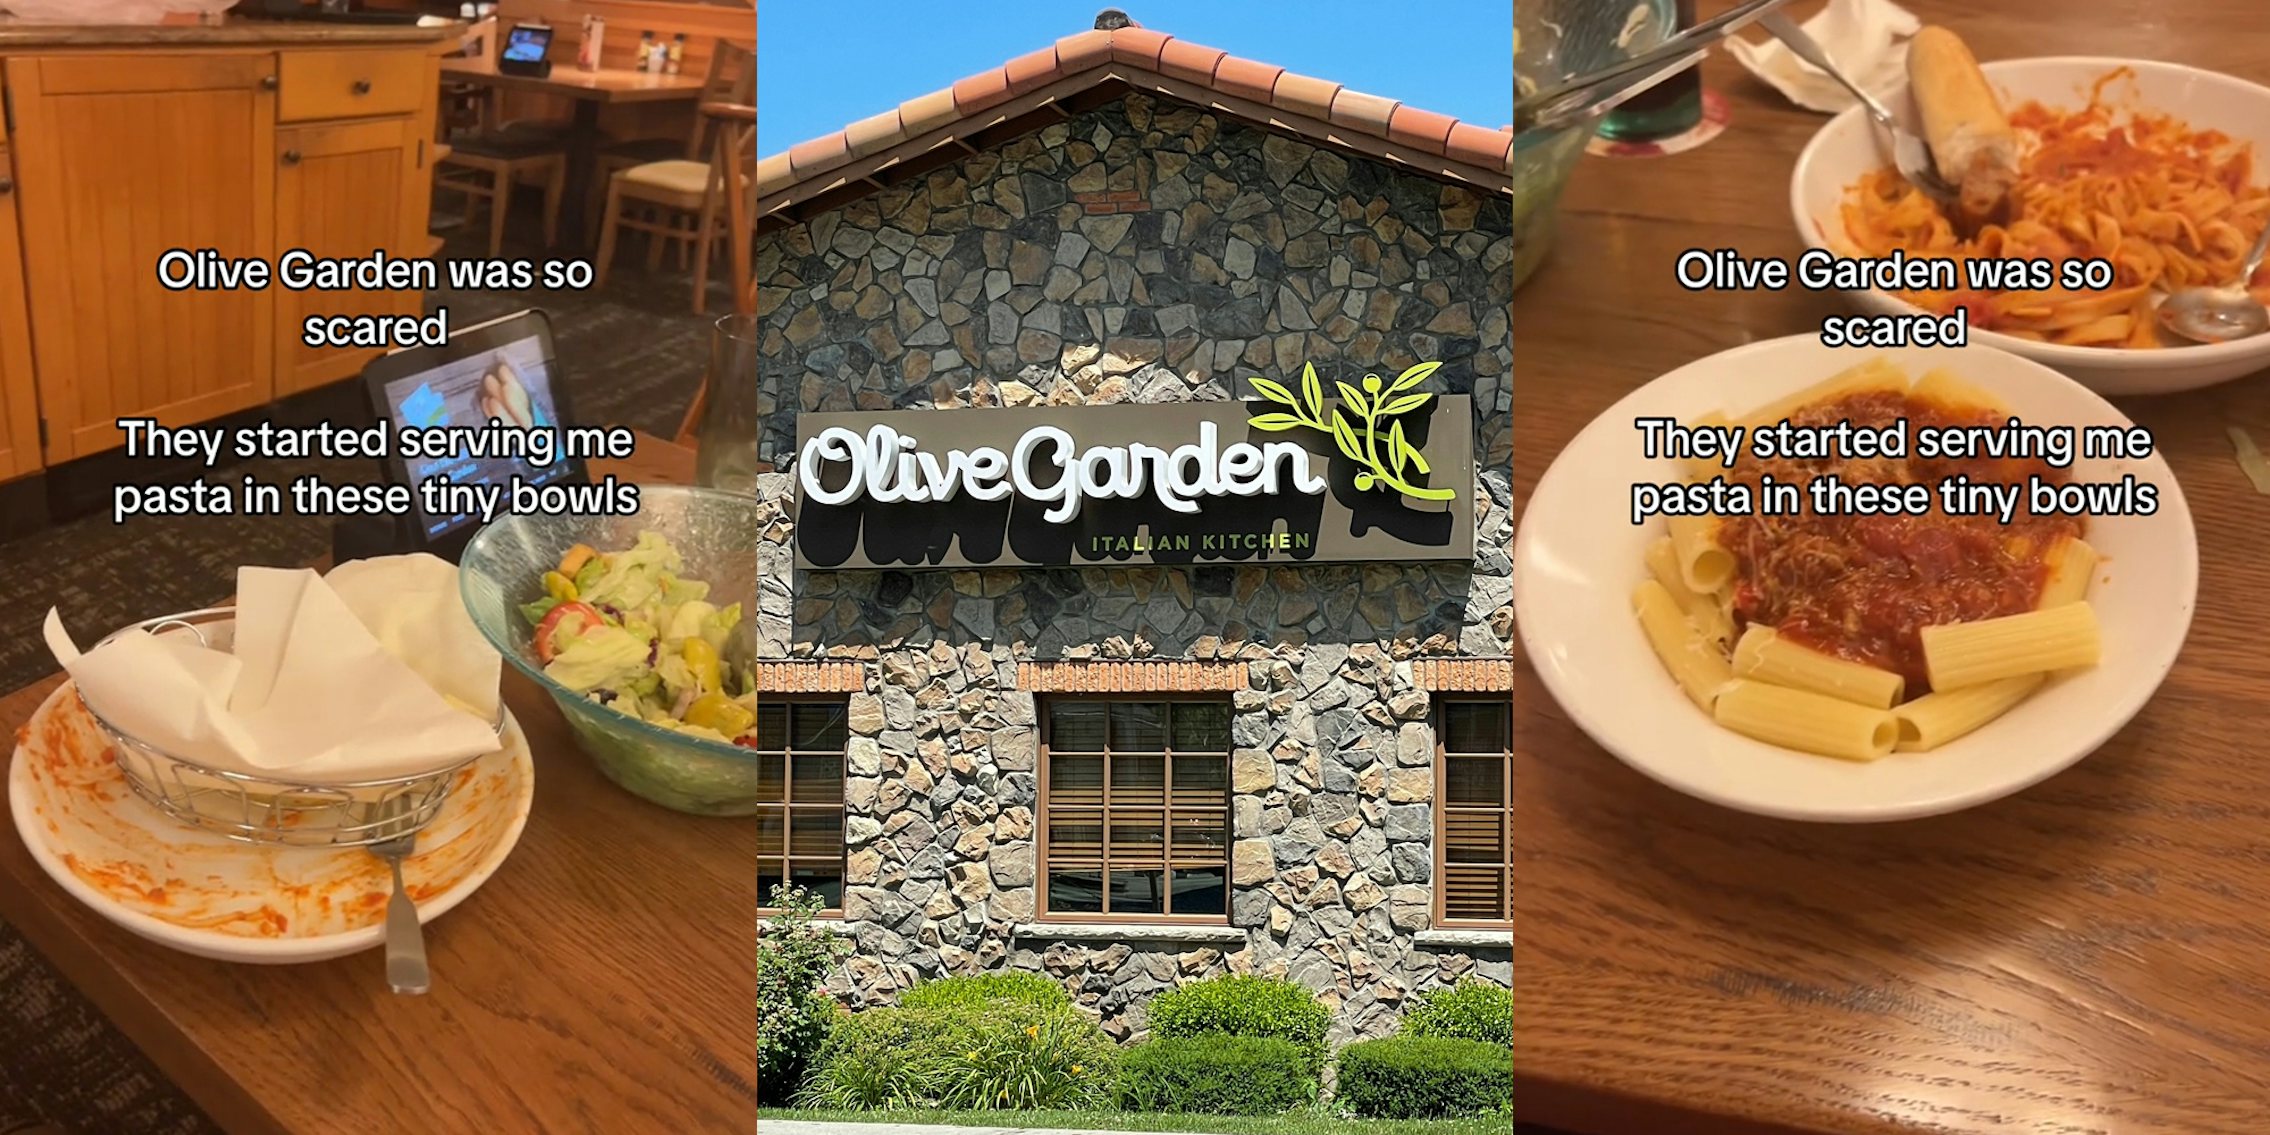 Olive Garden bowls on table with caption 'Olive Garden was so scared They started serving me pasta in these tiny bowls' (l) Olive Garden building with sign (c) Olive Garden bowls on table with caption 'Olive Garden was so scared They started serving me pasta in these tiny bowls' (r)